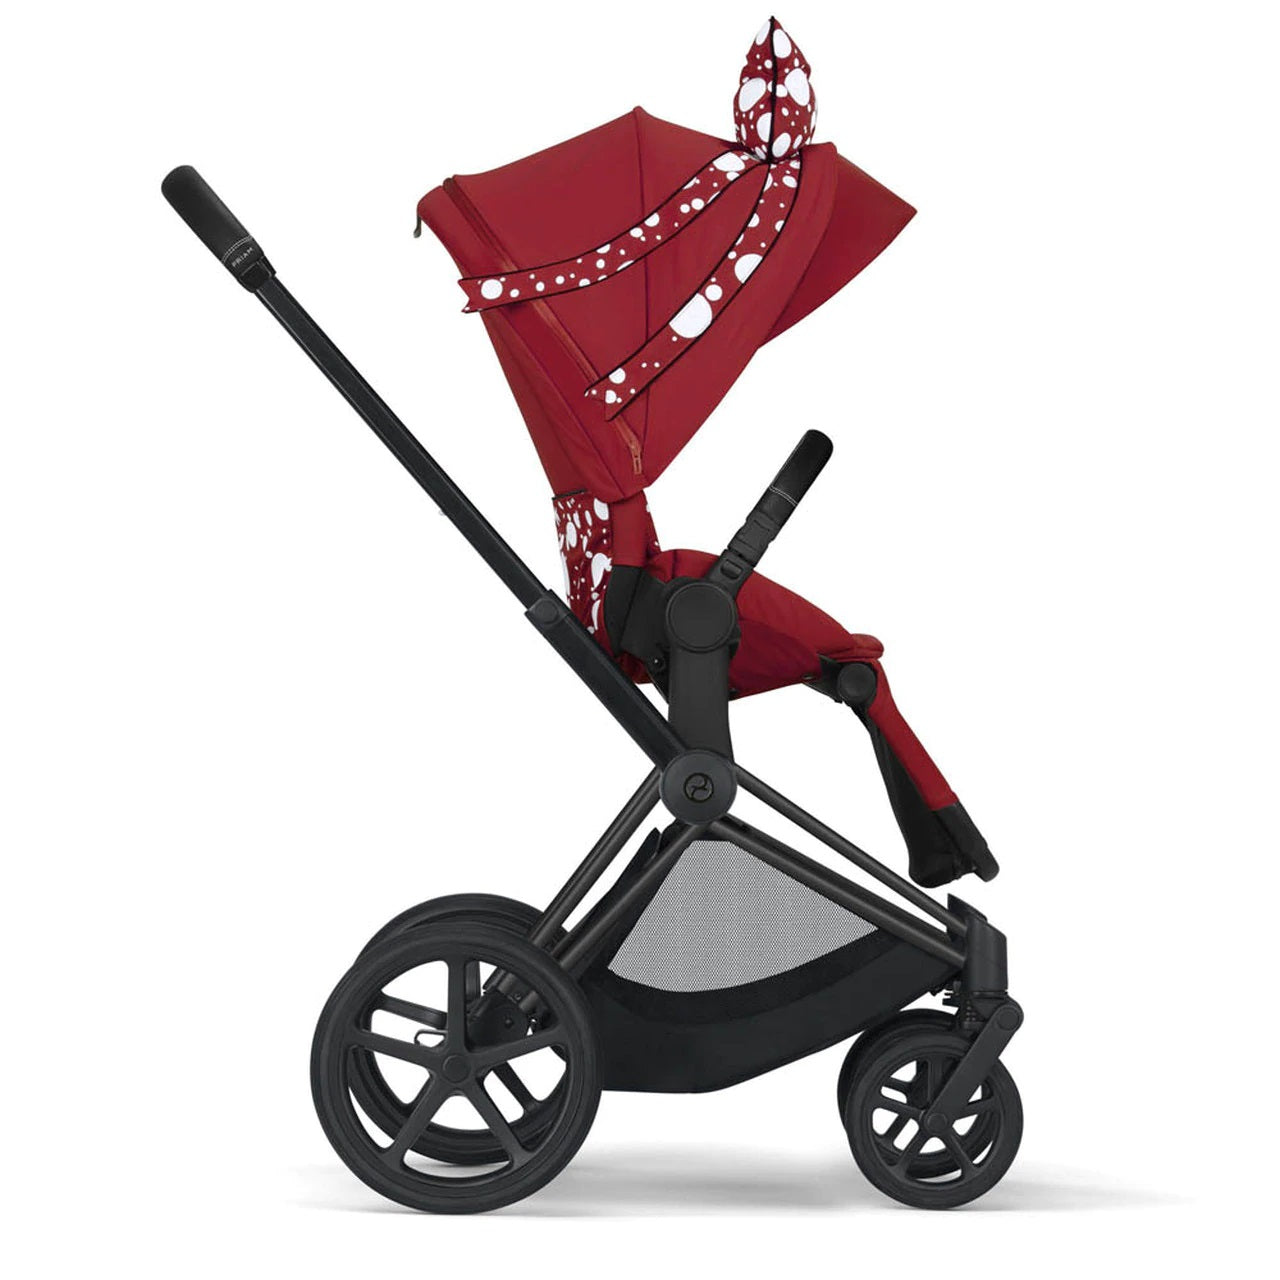 Cybex Priam Travel System with Lux Carrycot - Petticoat